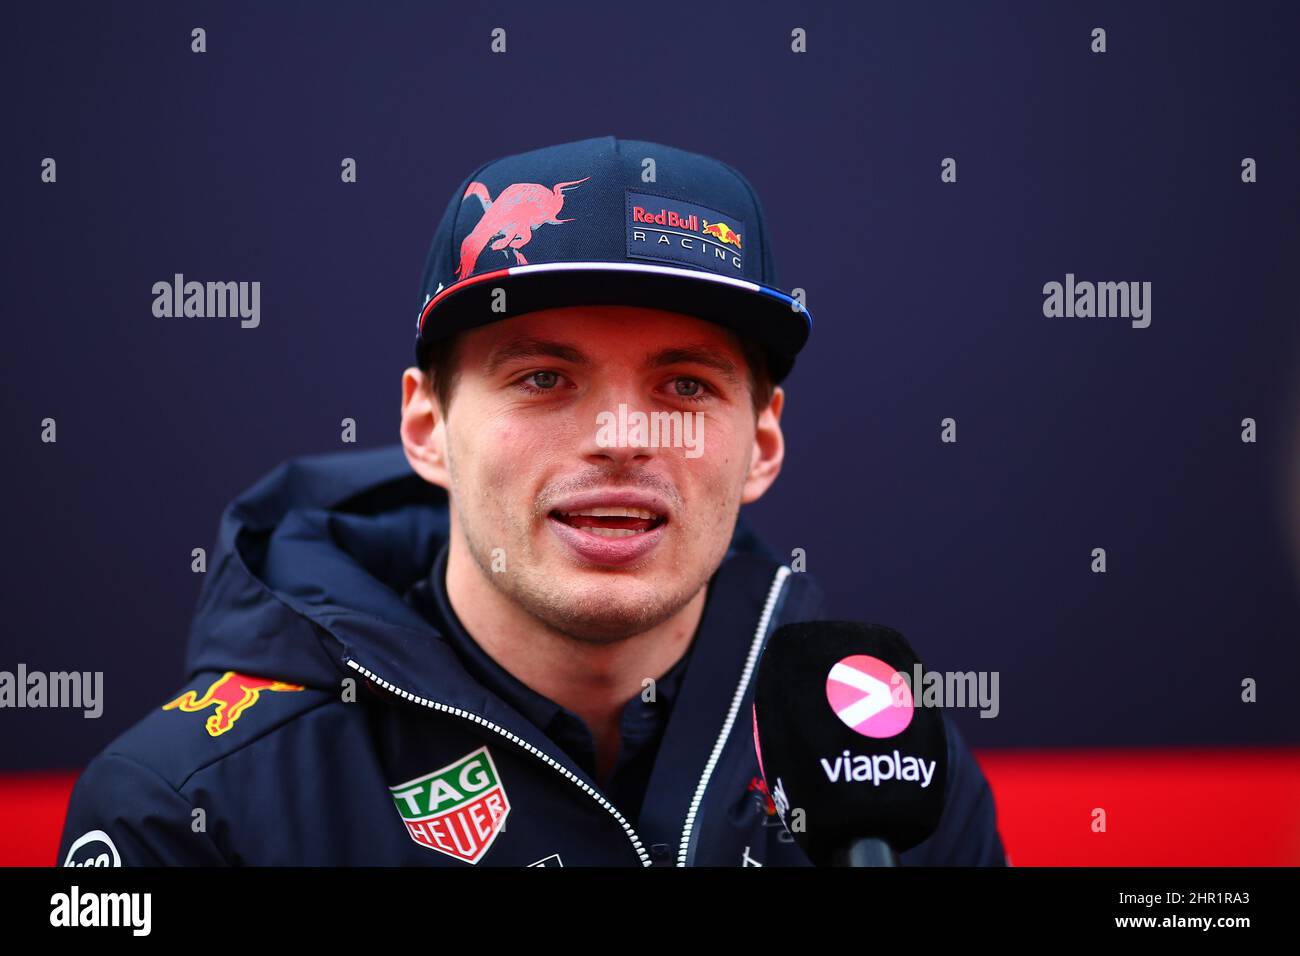 Barcelona, Spain. 24th Feb, 2022. Max Verstappen (NED) - RedBull RB18 during the Formula 1 Championship Pre-season test session prior the 2022 FIA Formula One World Championship on February 24, 2022 at the Circuit de Barcelona-Catalunya in Barcelona, Spain (Photo by Alessio De Marco/LiveMedia/Sipa USA) Credit: Sipa US/Alamy Live News Stock Photo